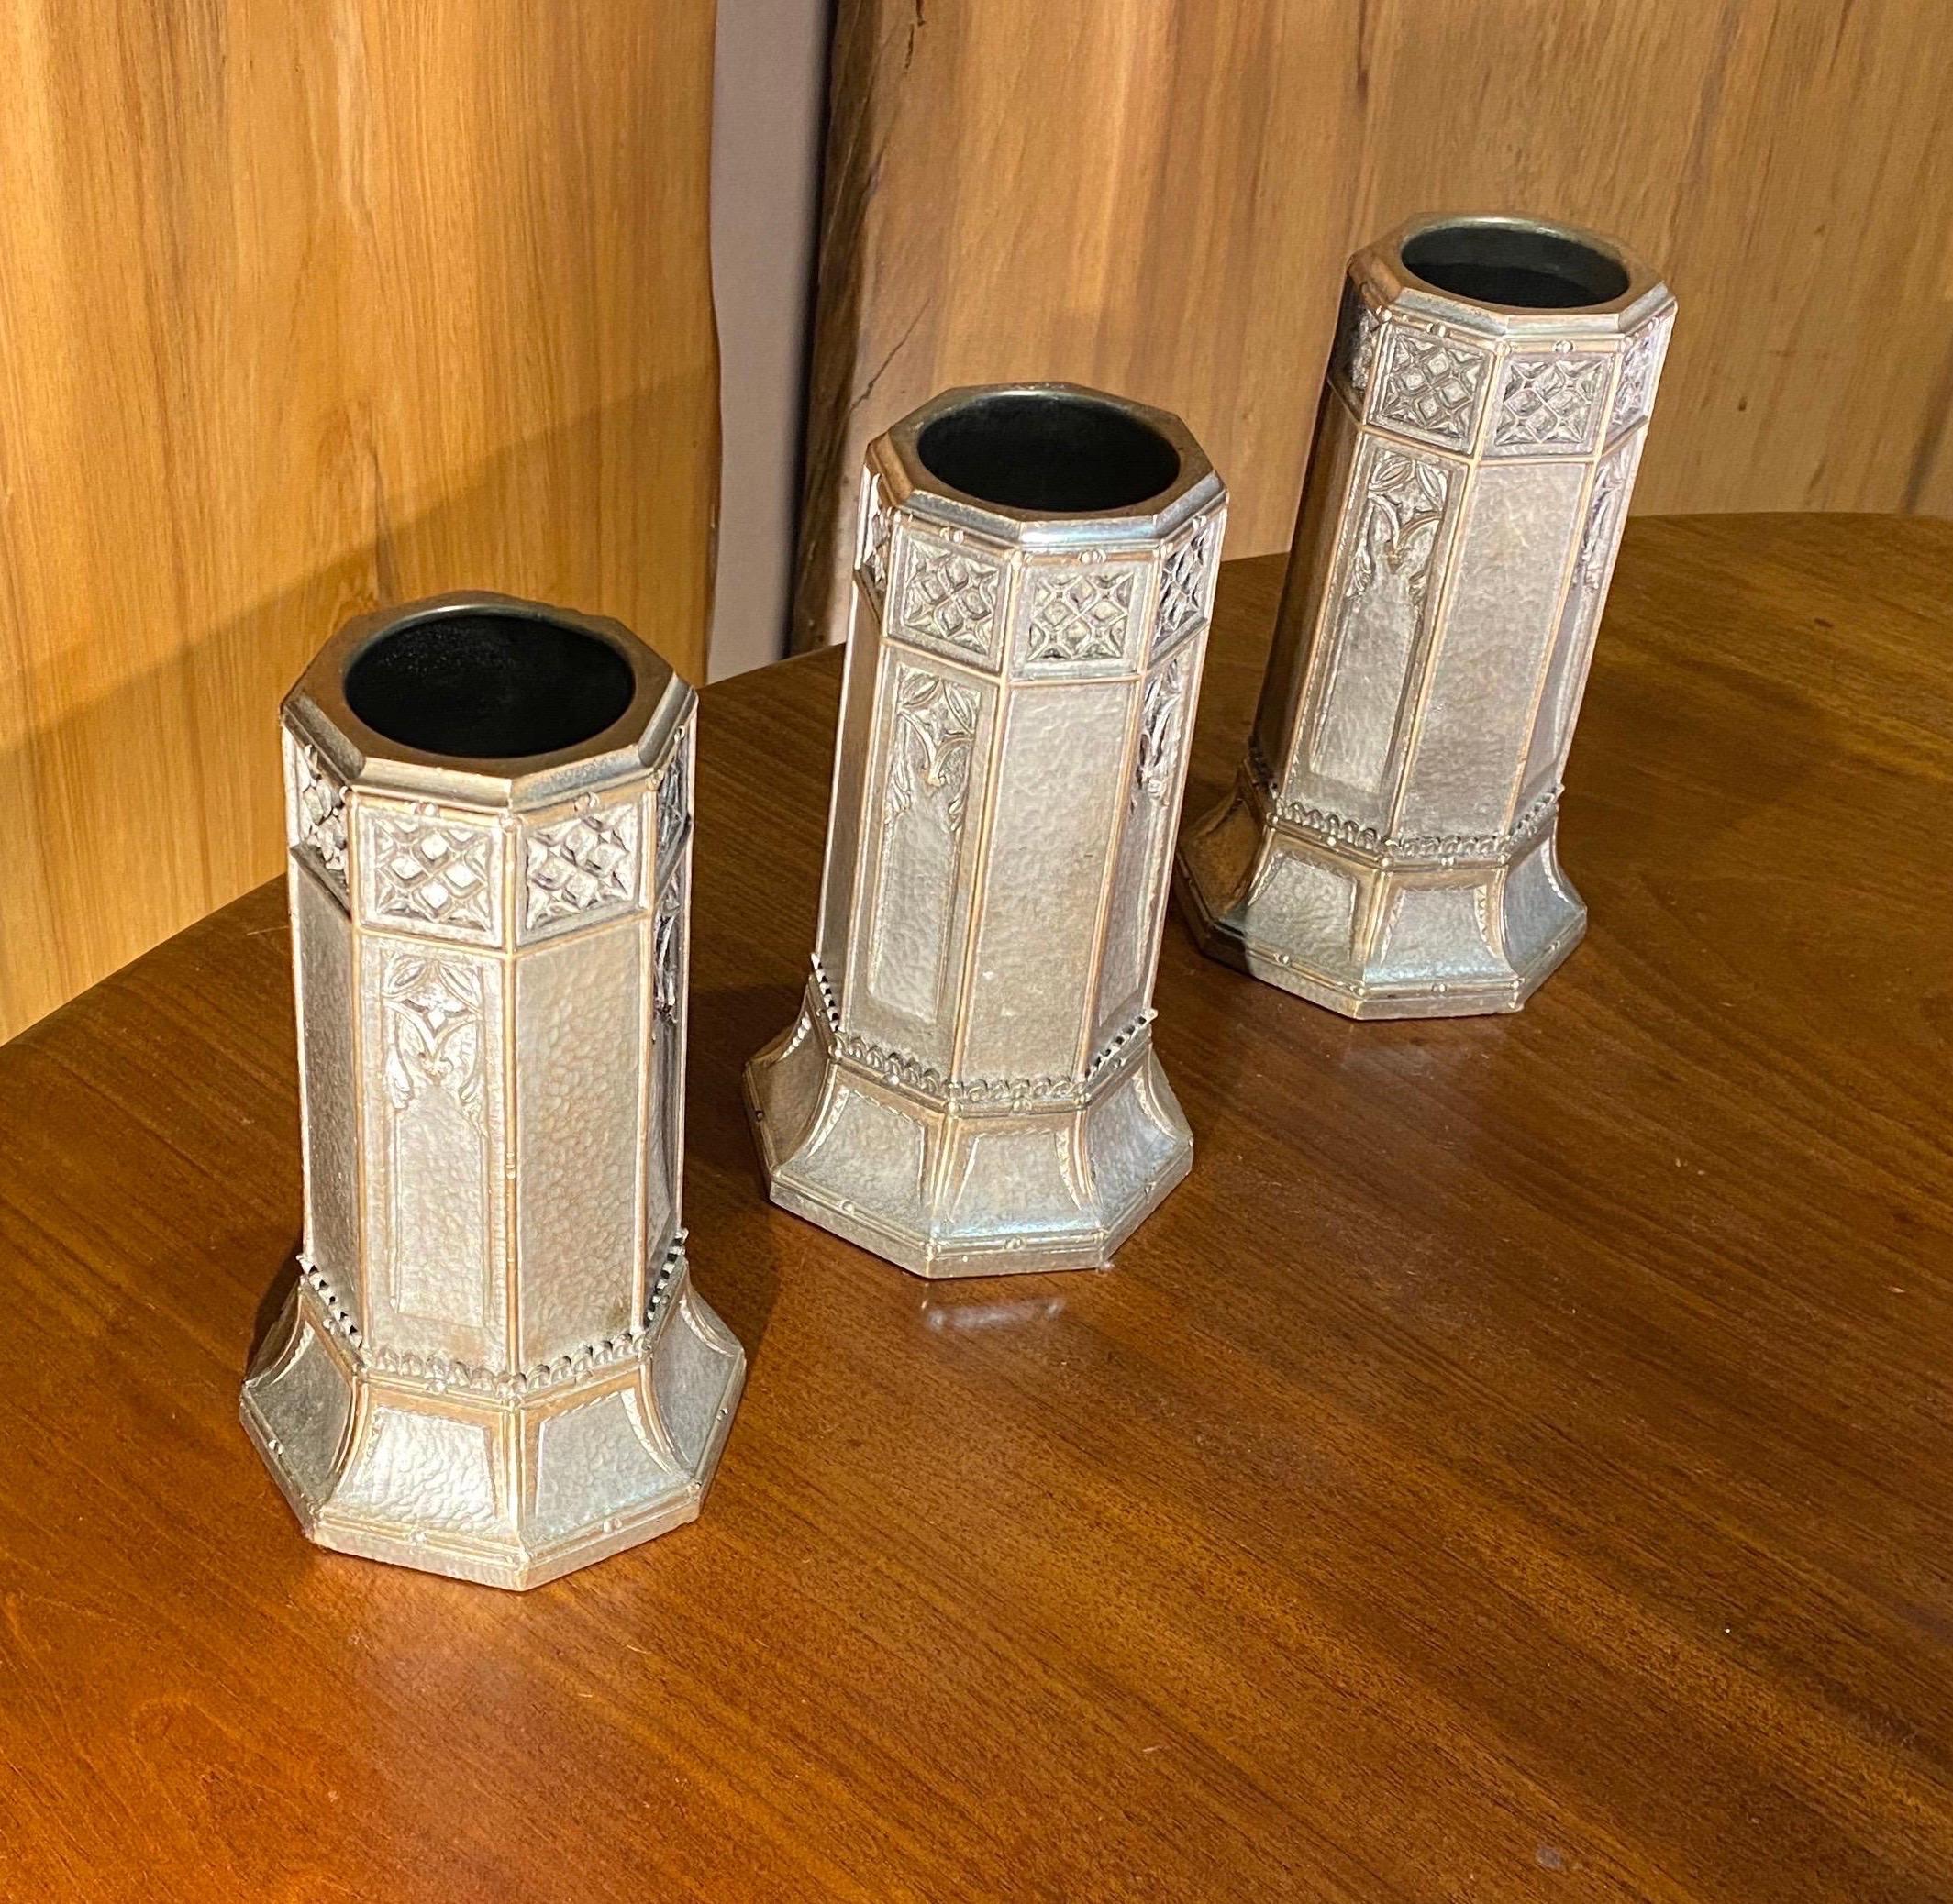 Set of 3 silvered bronze bud vases from the late 19th- early 20th century.